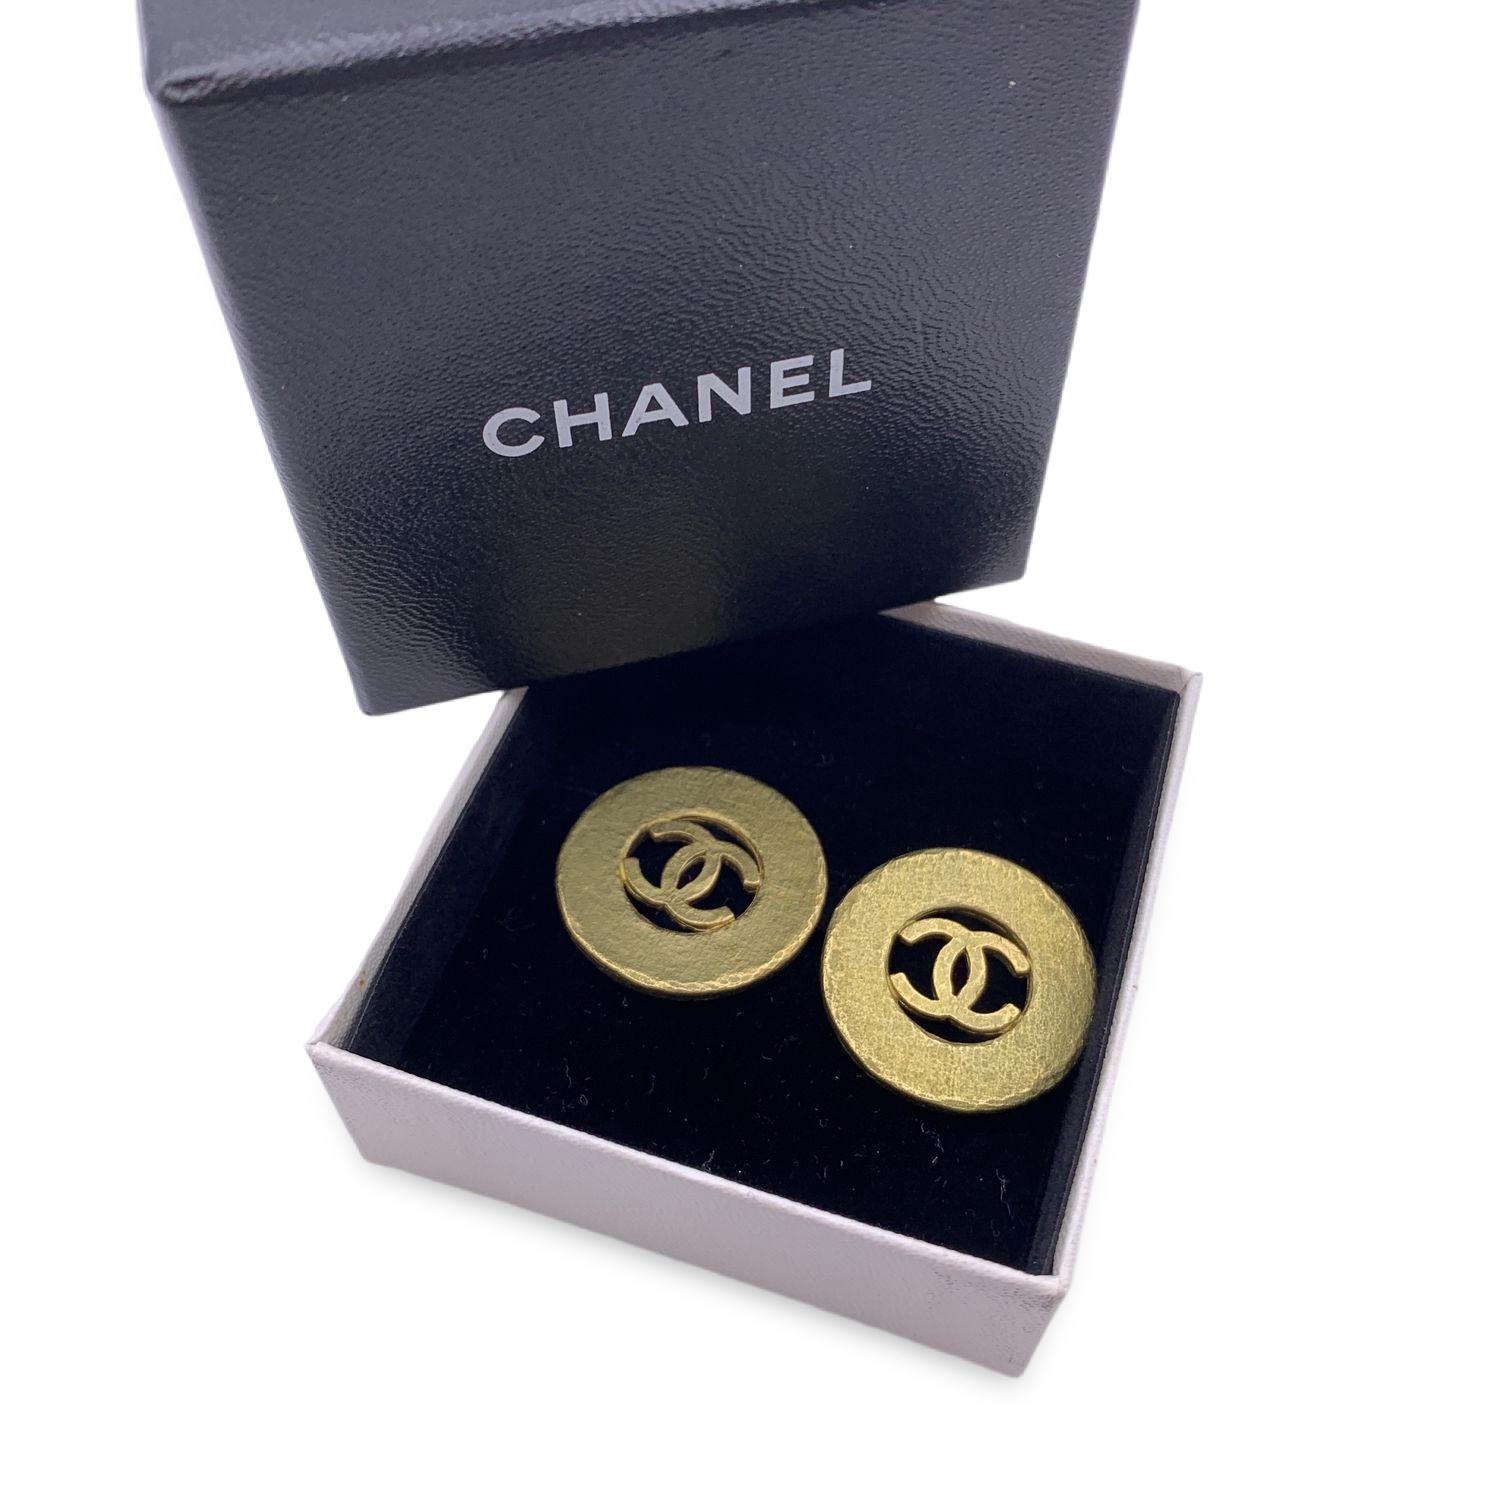 Gorgeous vintage CHANEL round aged gold metal earrings with CC logos. Clip-on design. Signed 'Chanel - 94 CC P - Made in France' oval hallmark on the reverse of the earring. Diameter: 25 mm

Condition

A - EXCELLENT

Gently used. The rubber on the